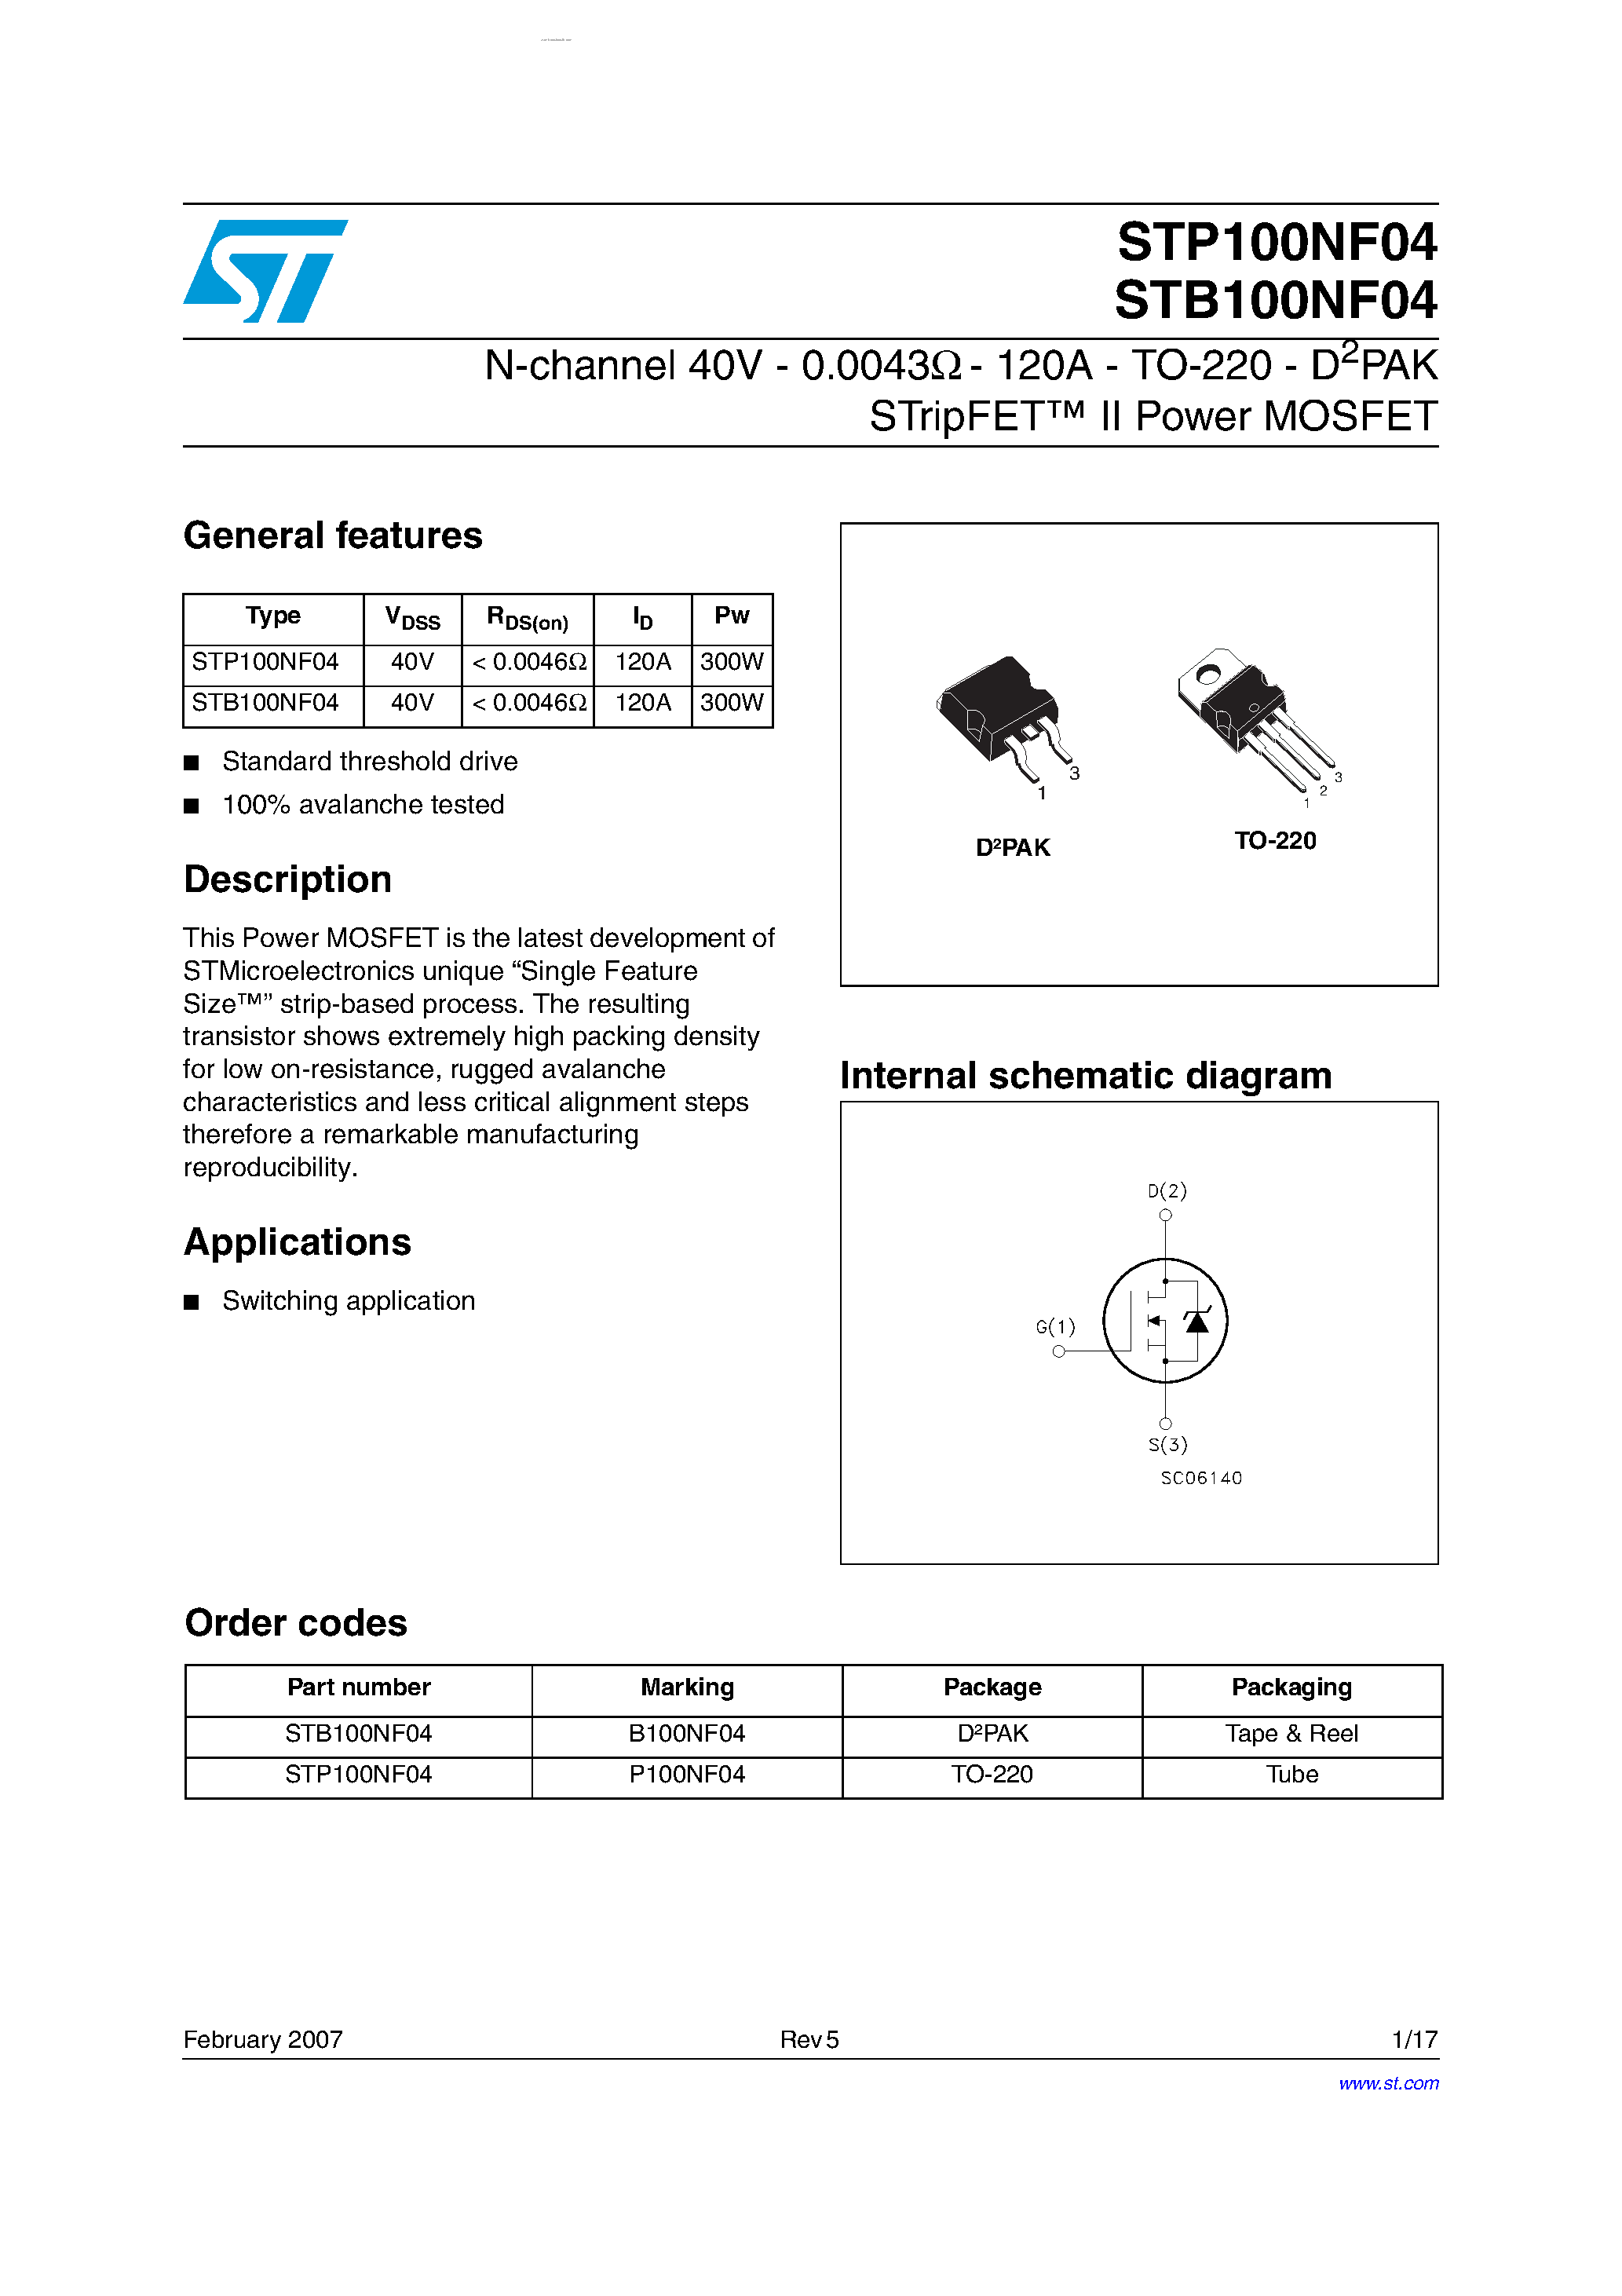 Datasheet STP100NF04 - N-channel Power MOSFET page 1